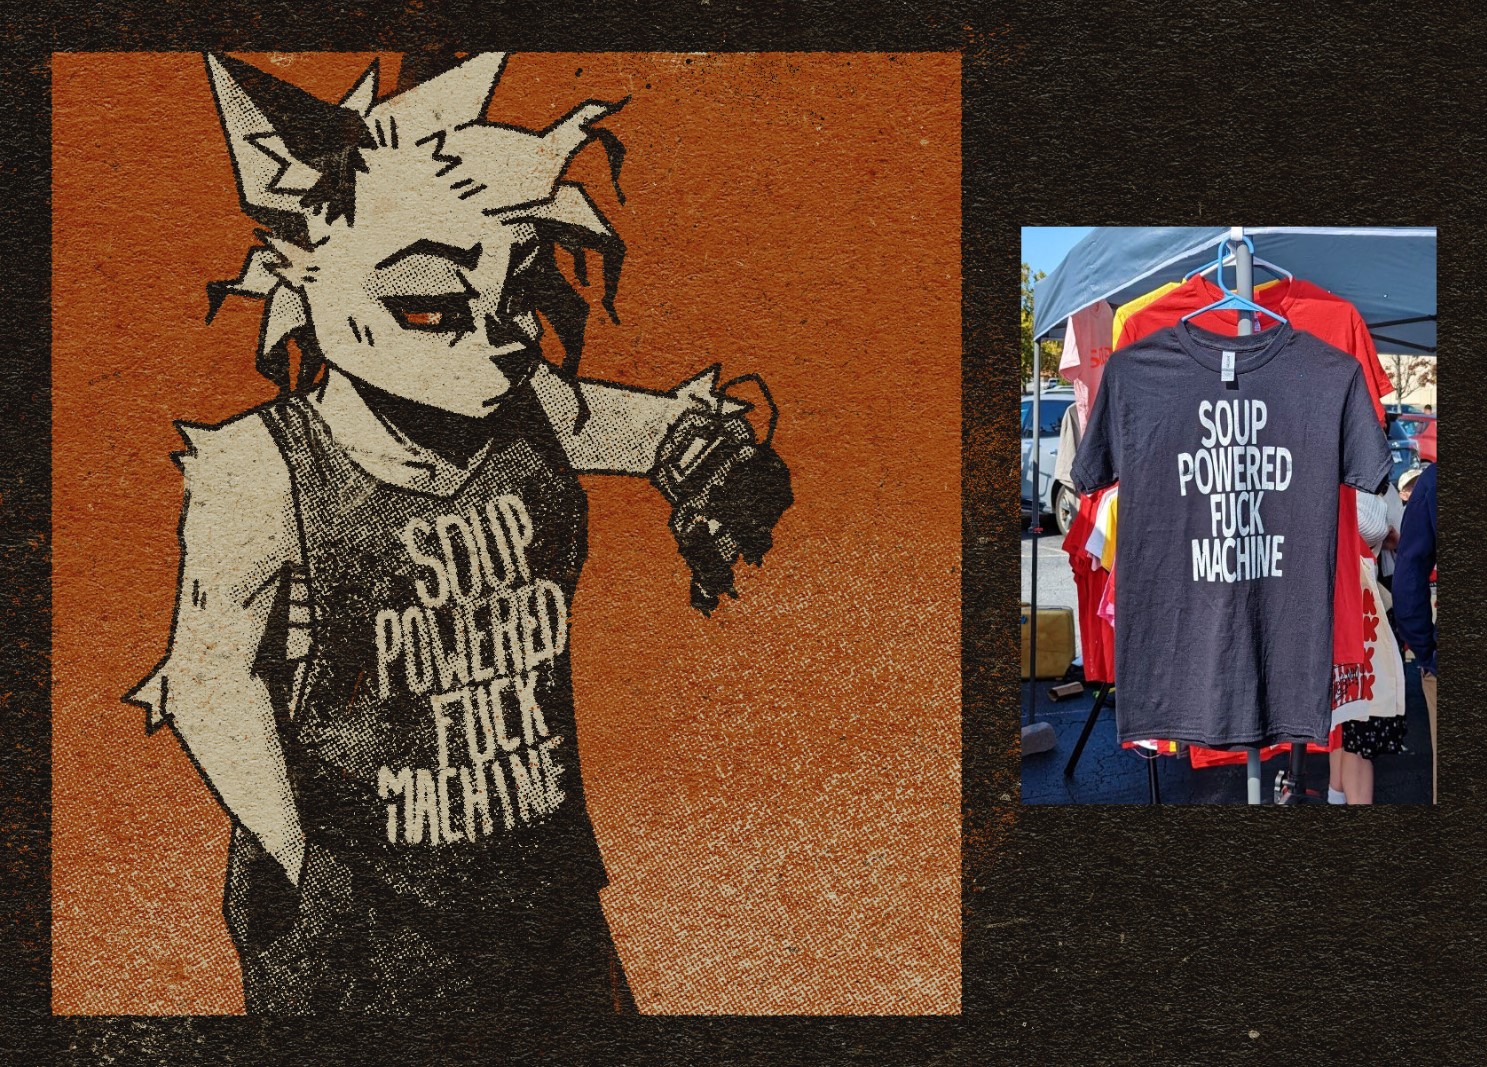 An illustration of an anthro cat person wearing a tank top and checking the device on their wrist. Their shirt reads, "soup powered fuck machine". There is a photo of a shirt with the same slogan to the right of the illustration.